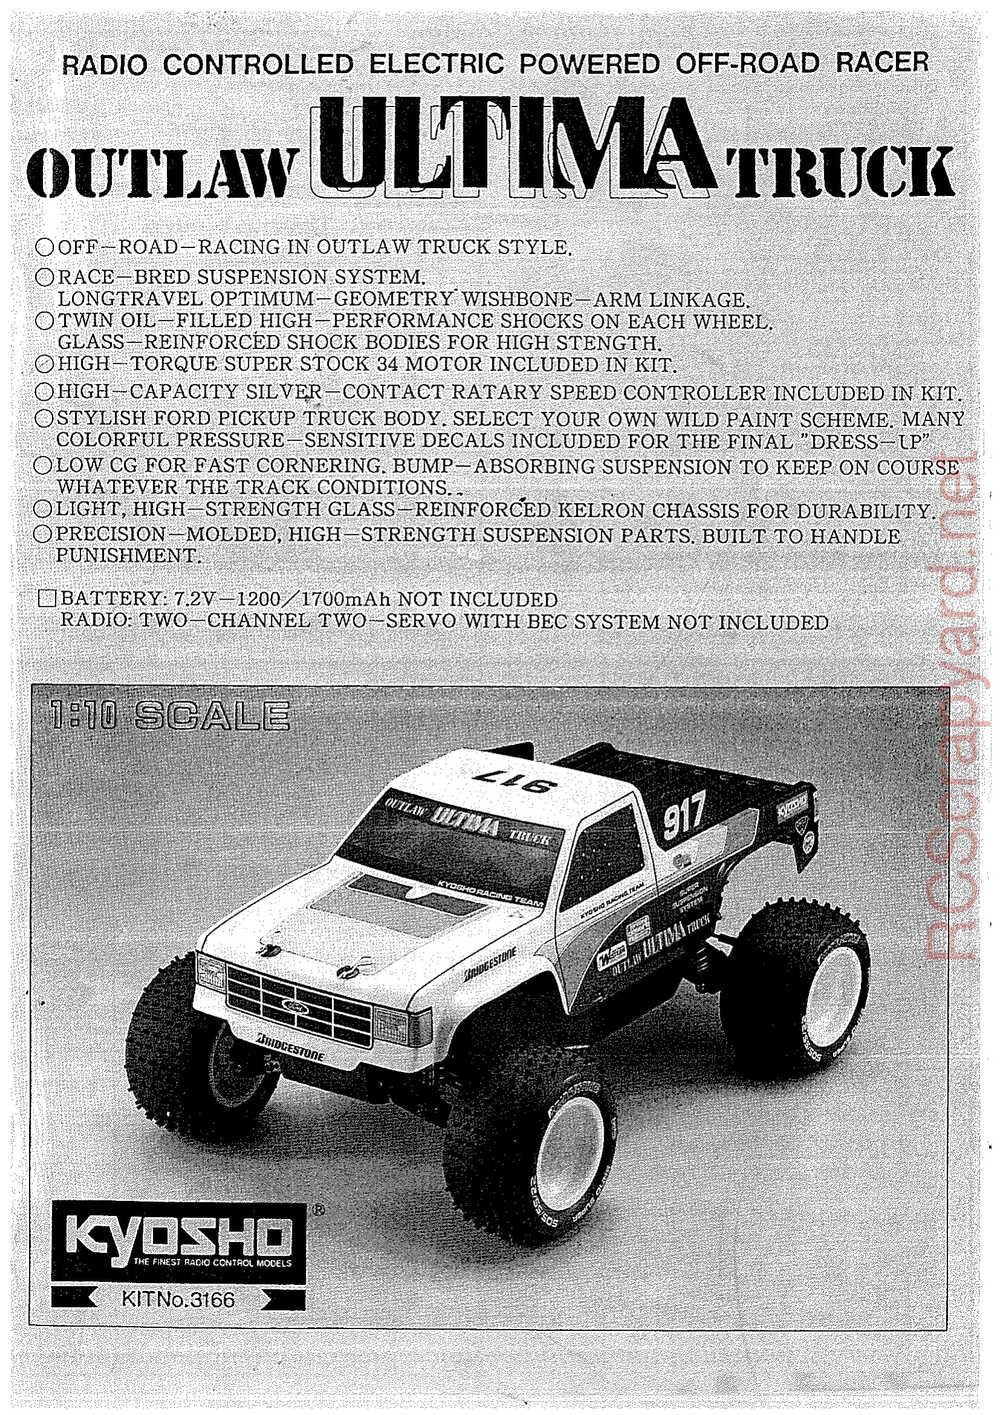 Kyosho - 3166 - Outlaw-Ultima Truck - Manual - Page 01